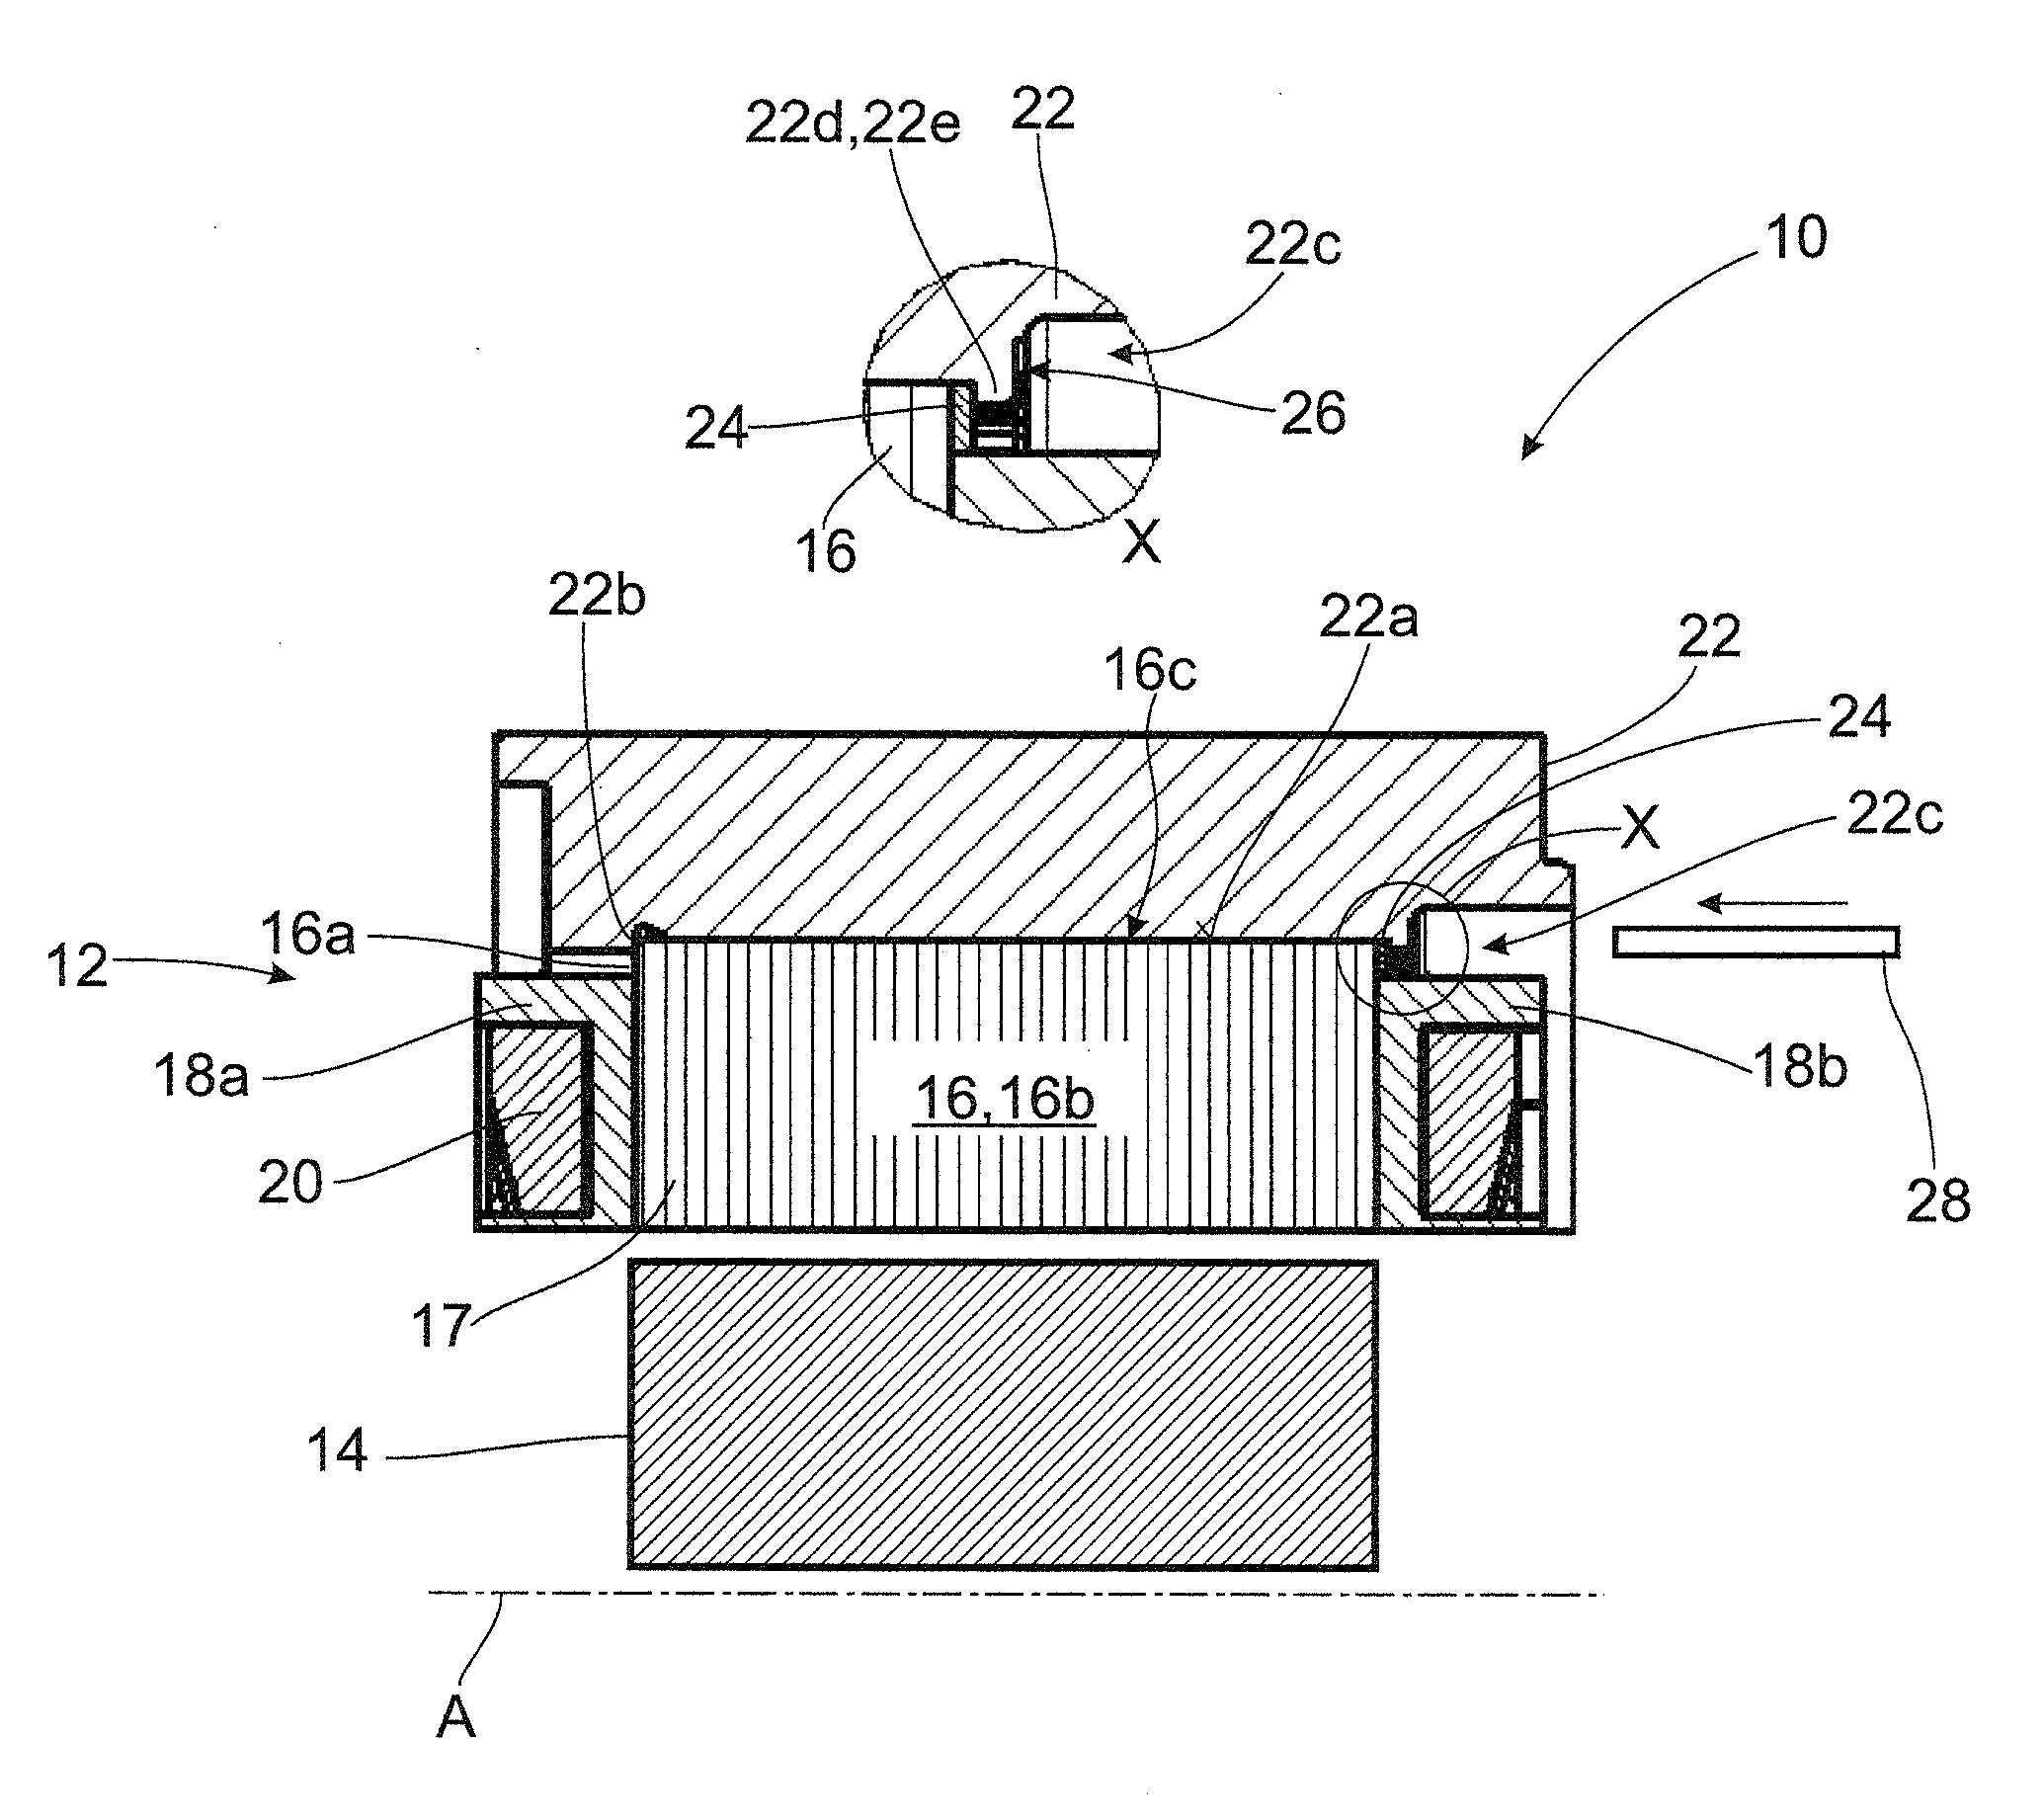 Modular Unit Comprising A Laminate Stack For An Electric Machine, Method For Producing Such A Modular Unit, And Electric Machine